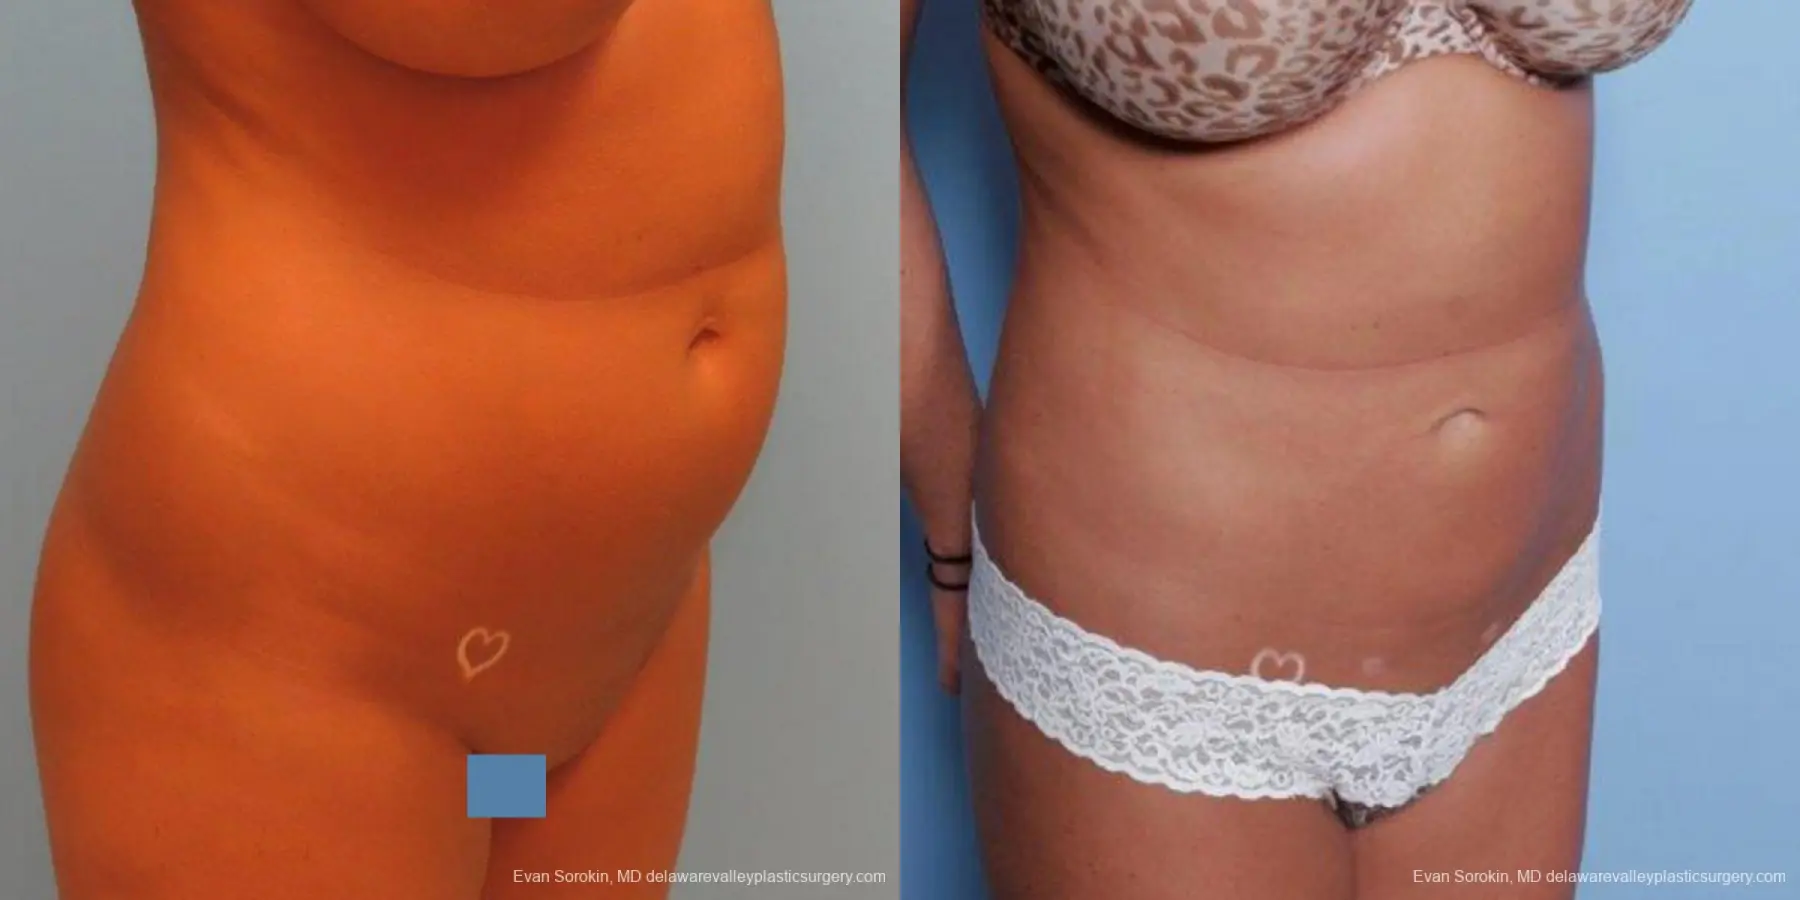 Philadelphia Liposuction 9483 - Before and After 4